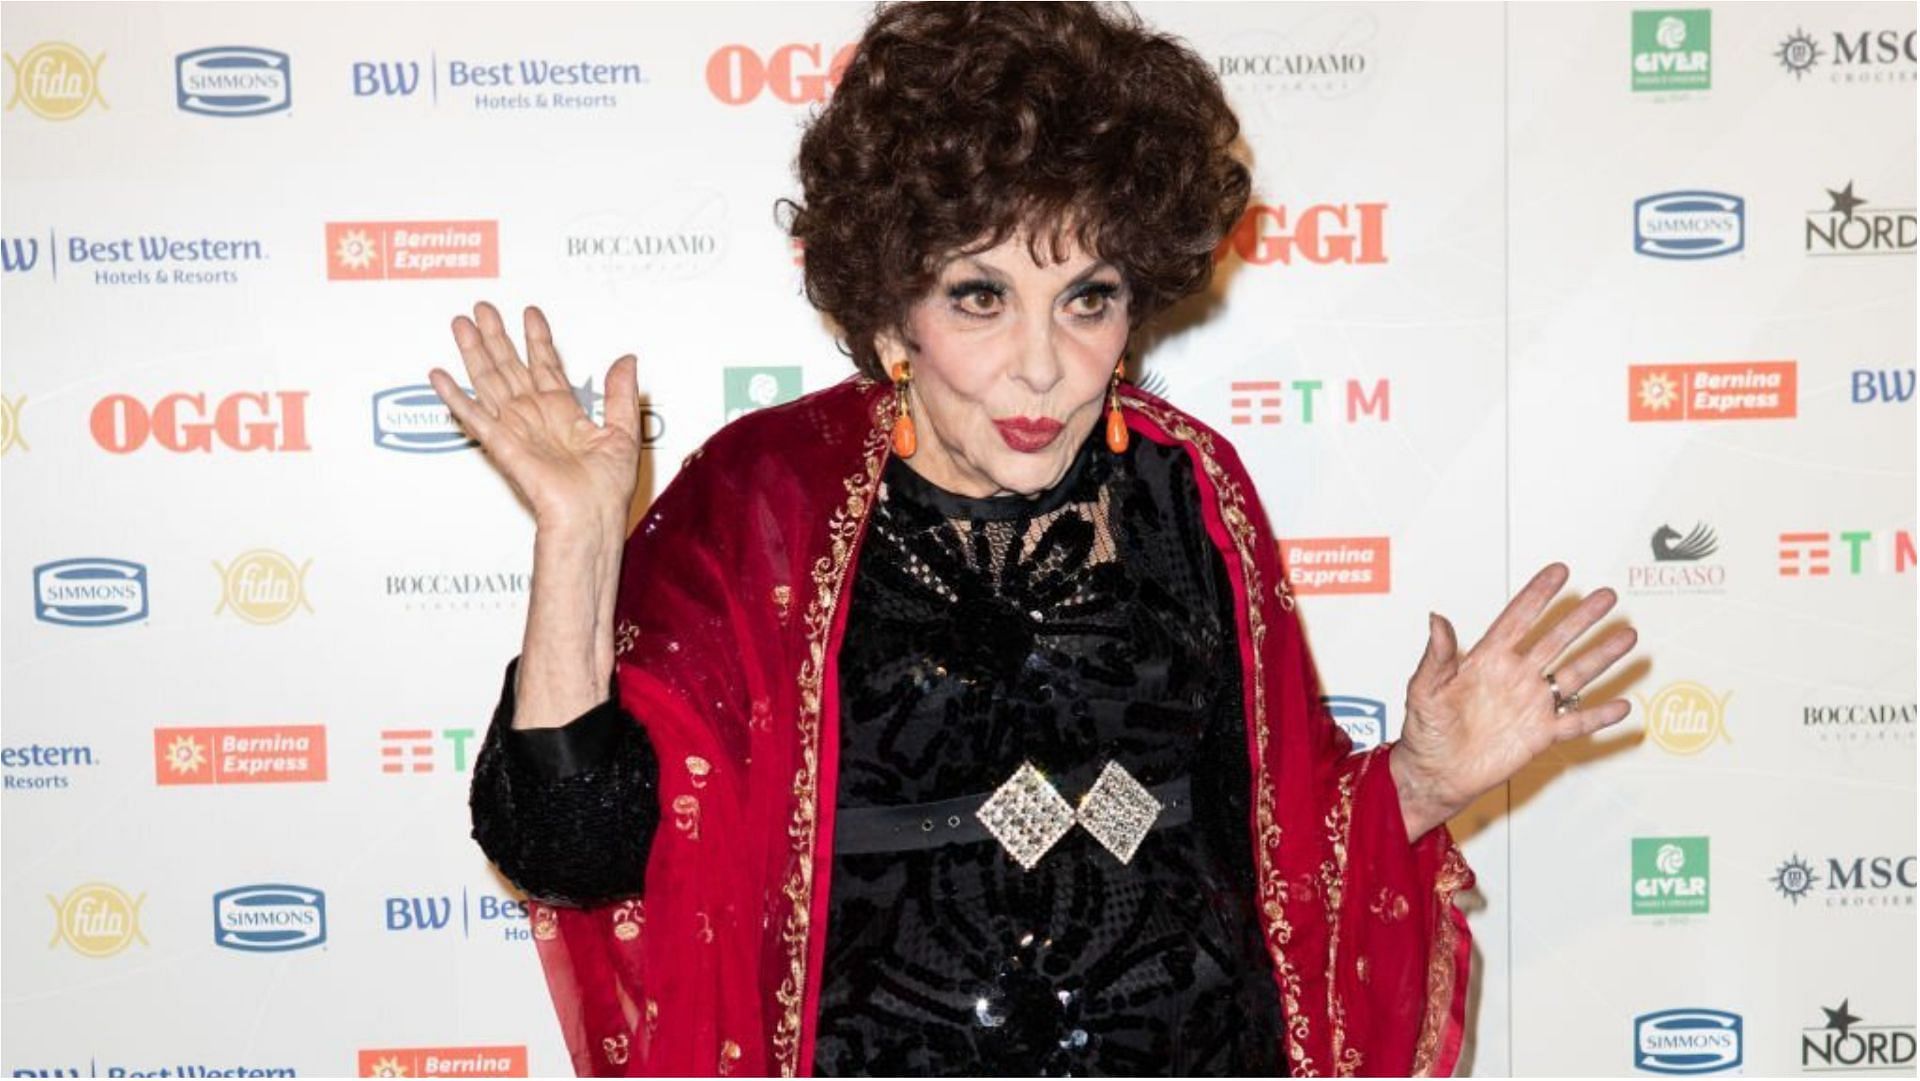 Gina Lollobrigida has accumulated a lot of wealth from her career as an actress, politician and photojournalist (Image via Rosdiana Ciaravolo/Getty Images)